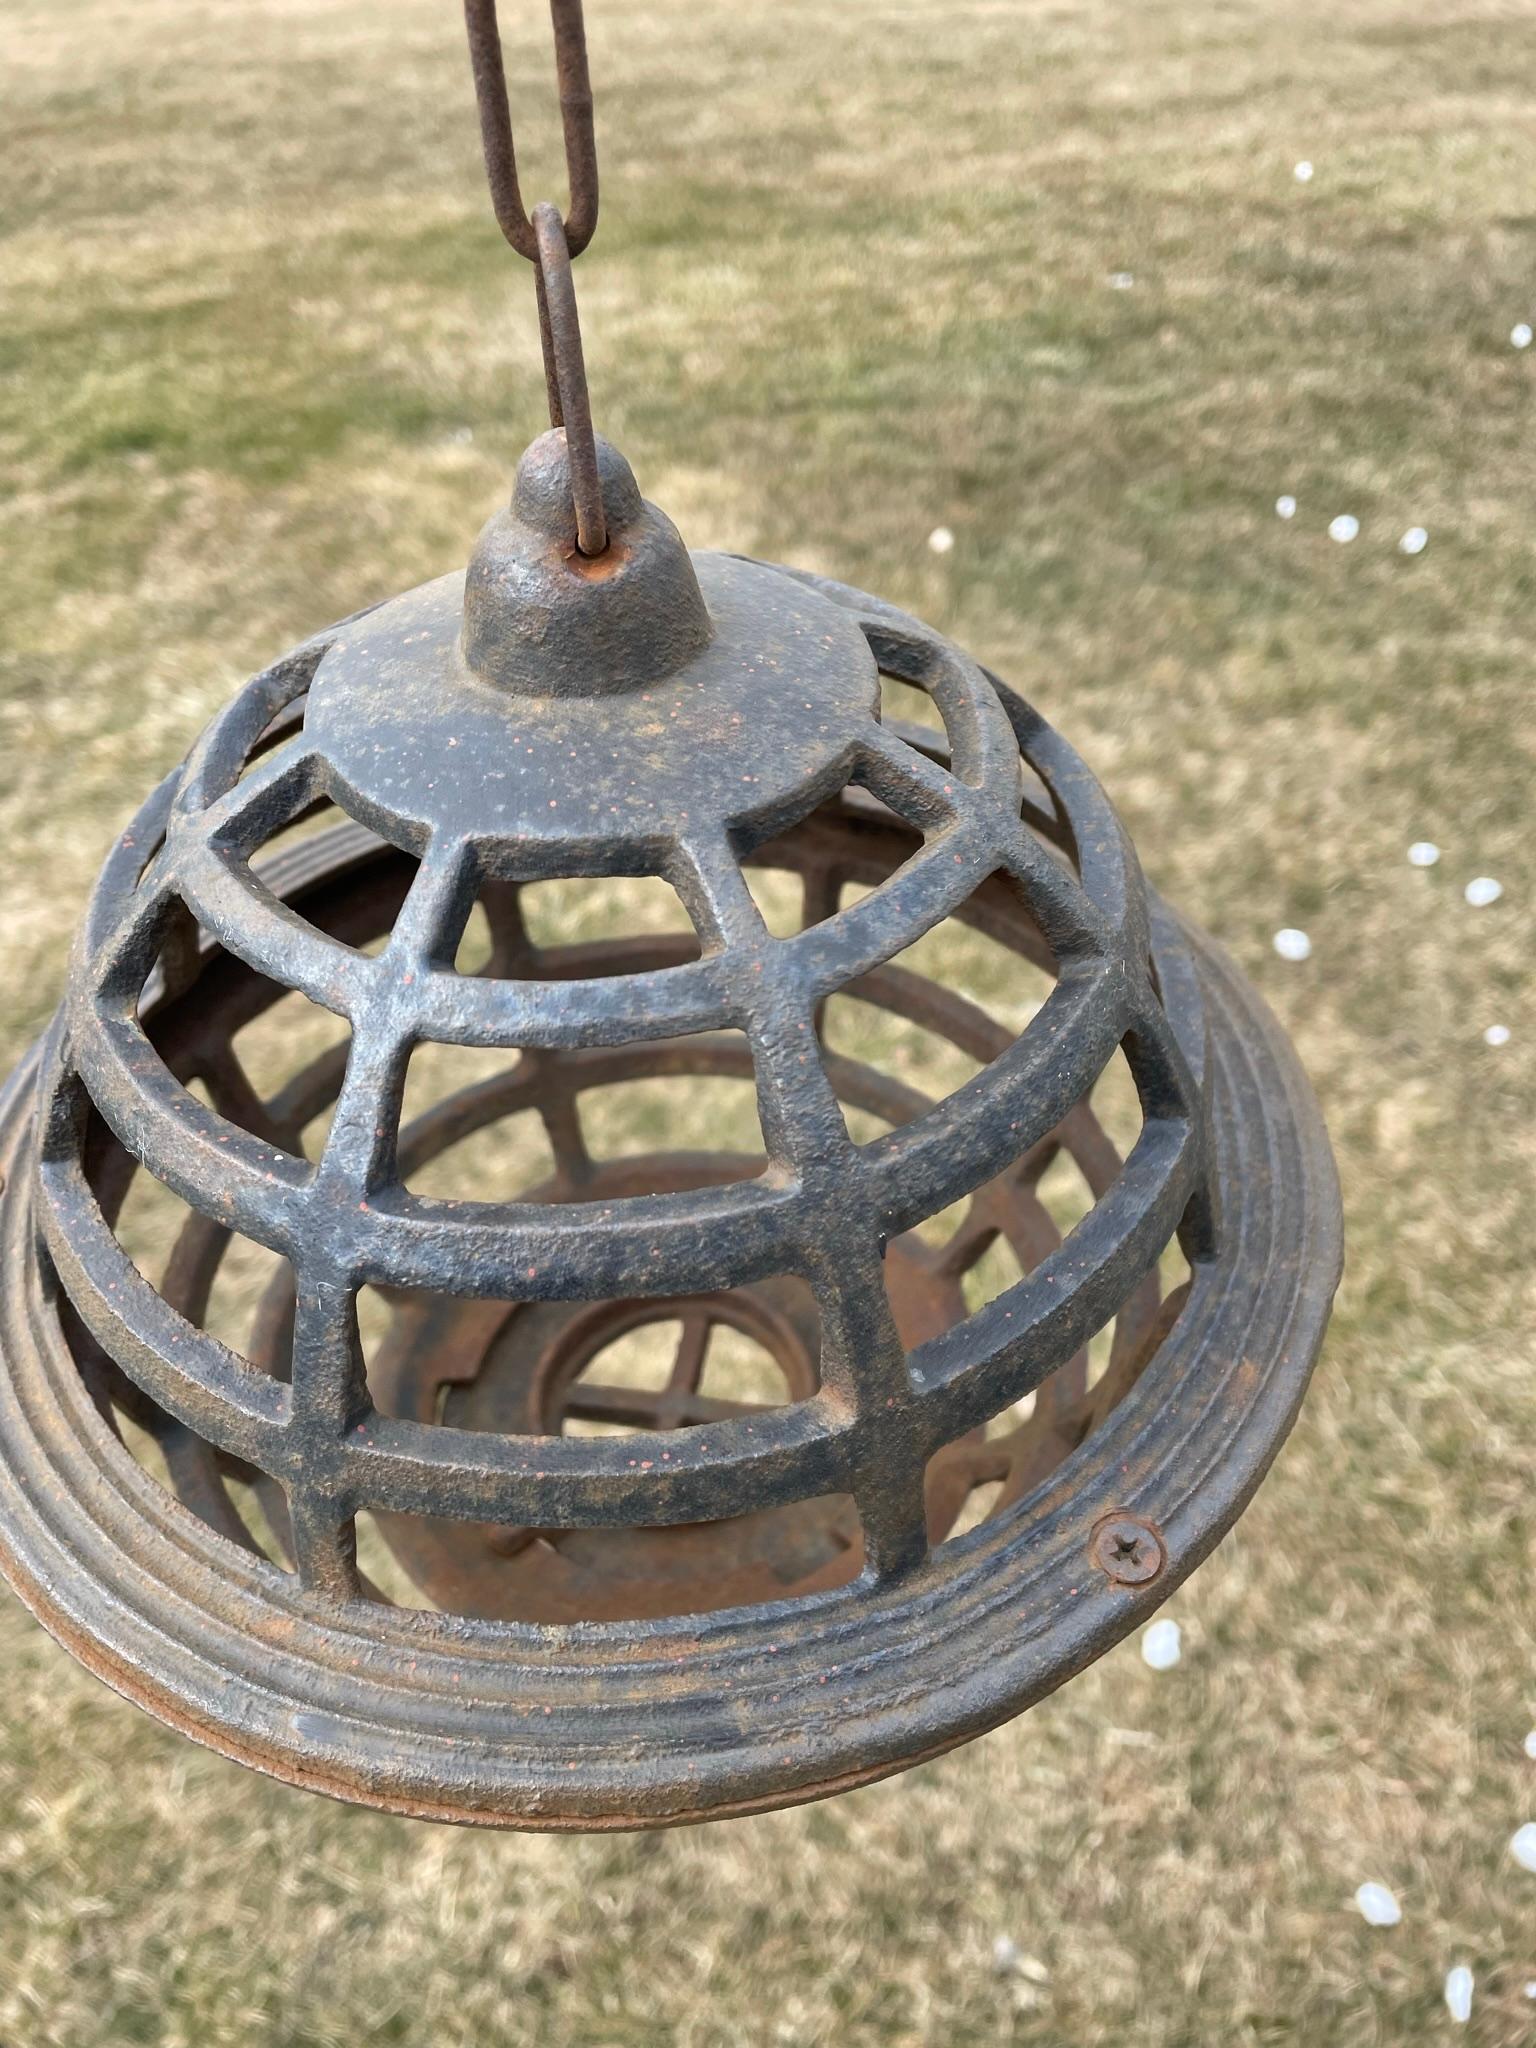 Japanese Old Unique Five Continents Globe Lighting Lantern 5